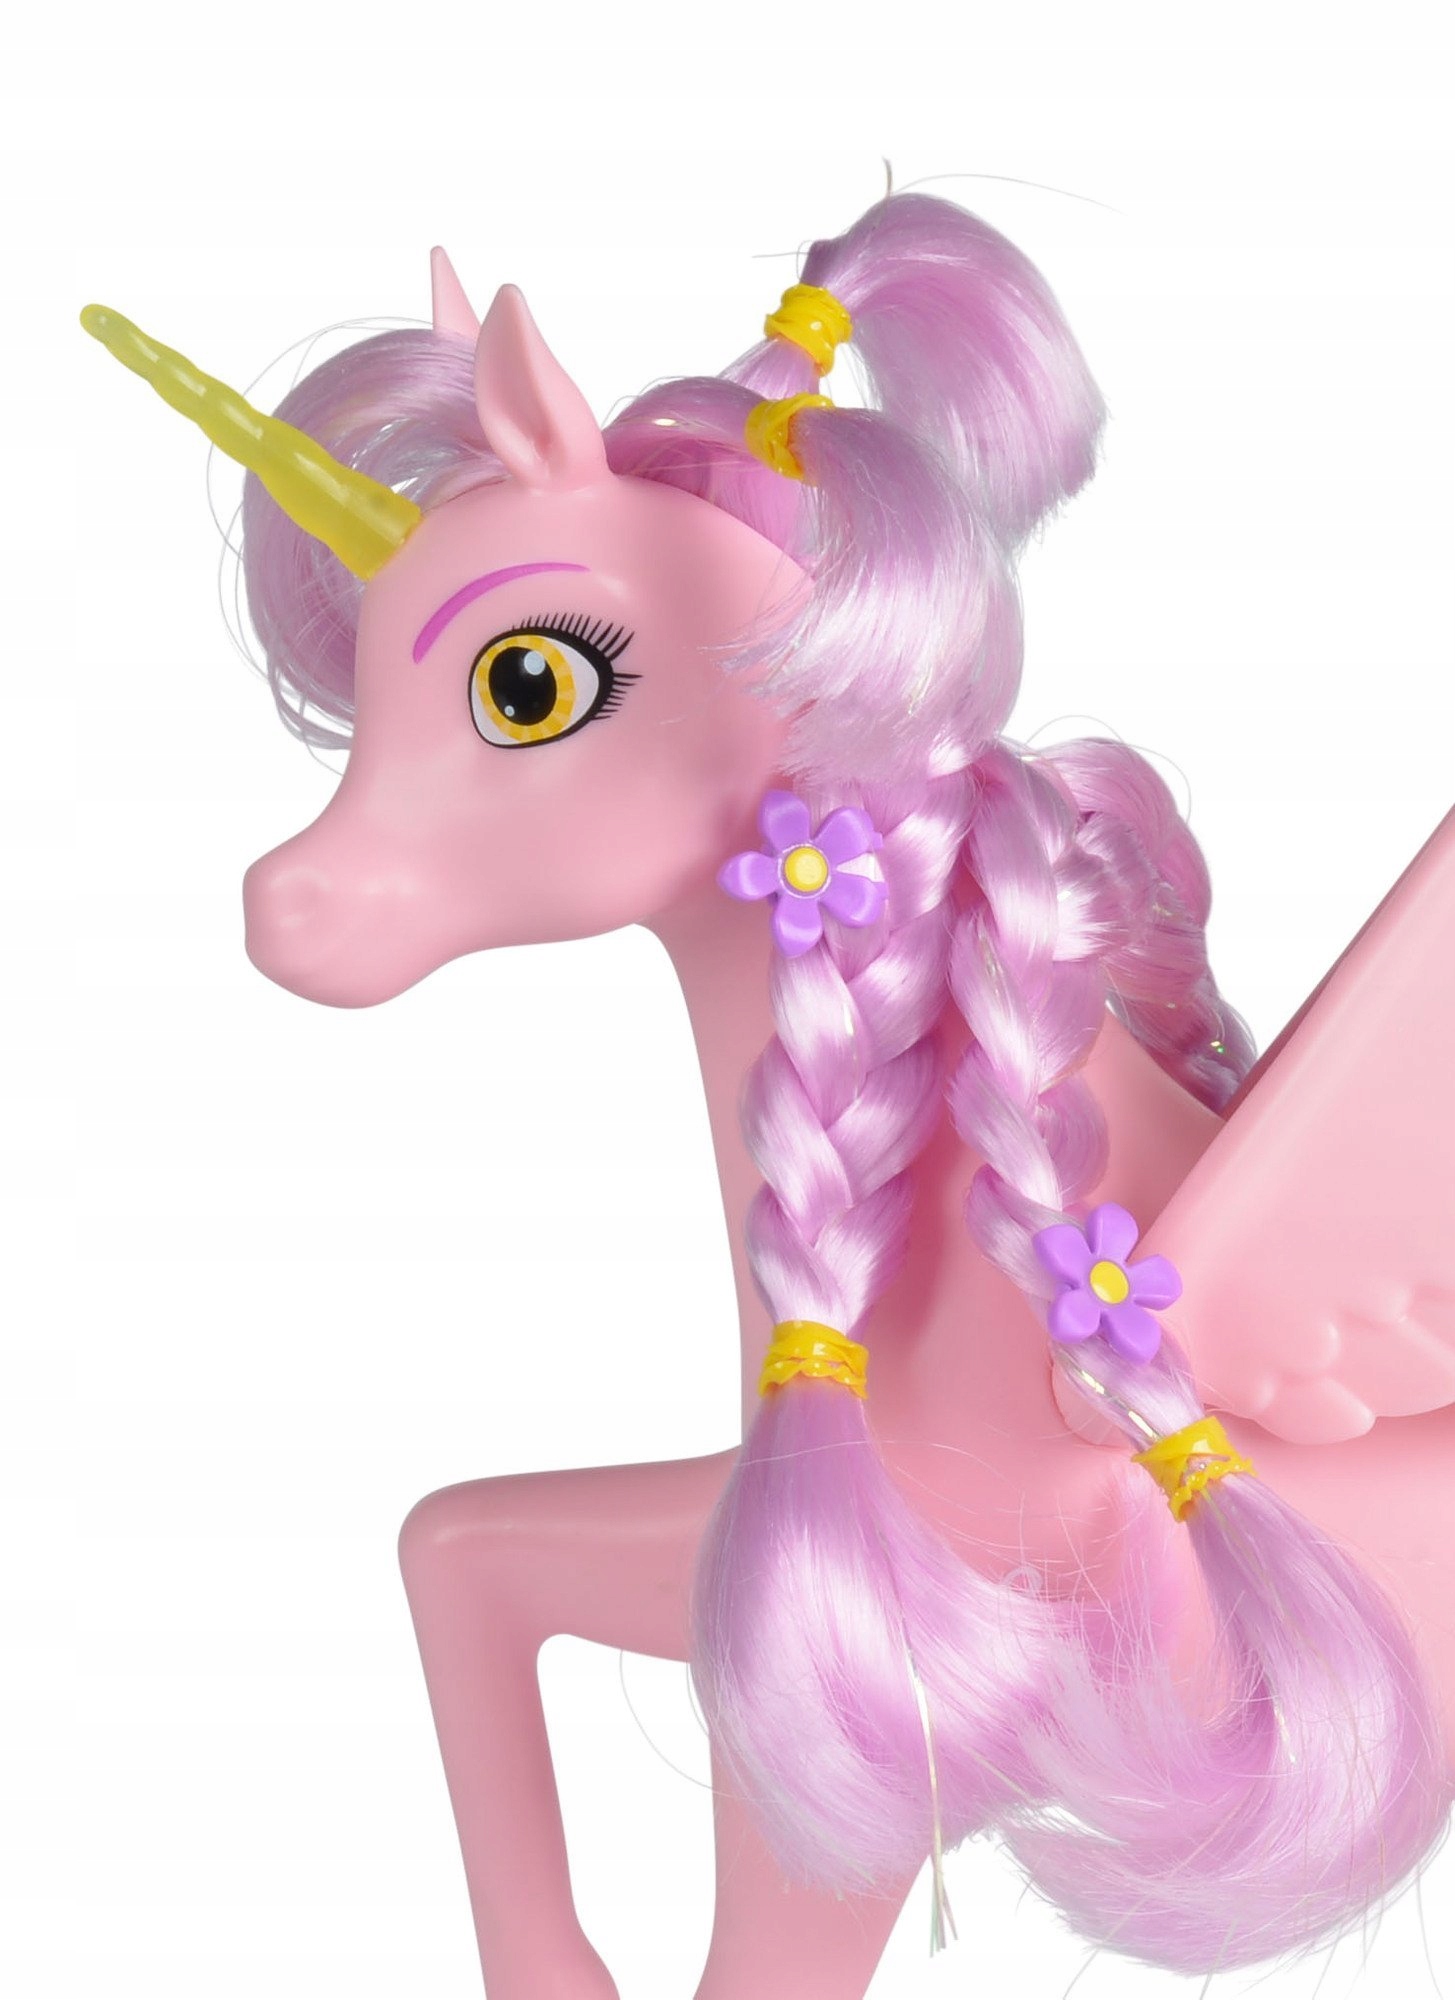 MIA AND ME UNICORN KYARA WITH MOVABLE WINGS + MANE BRUSH Матеріал: пластик